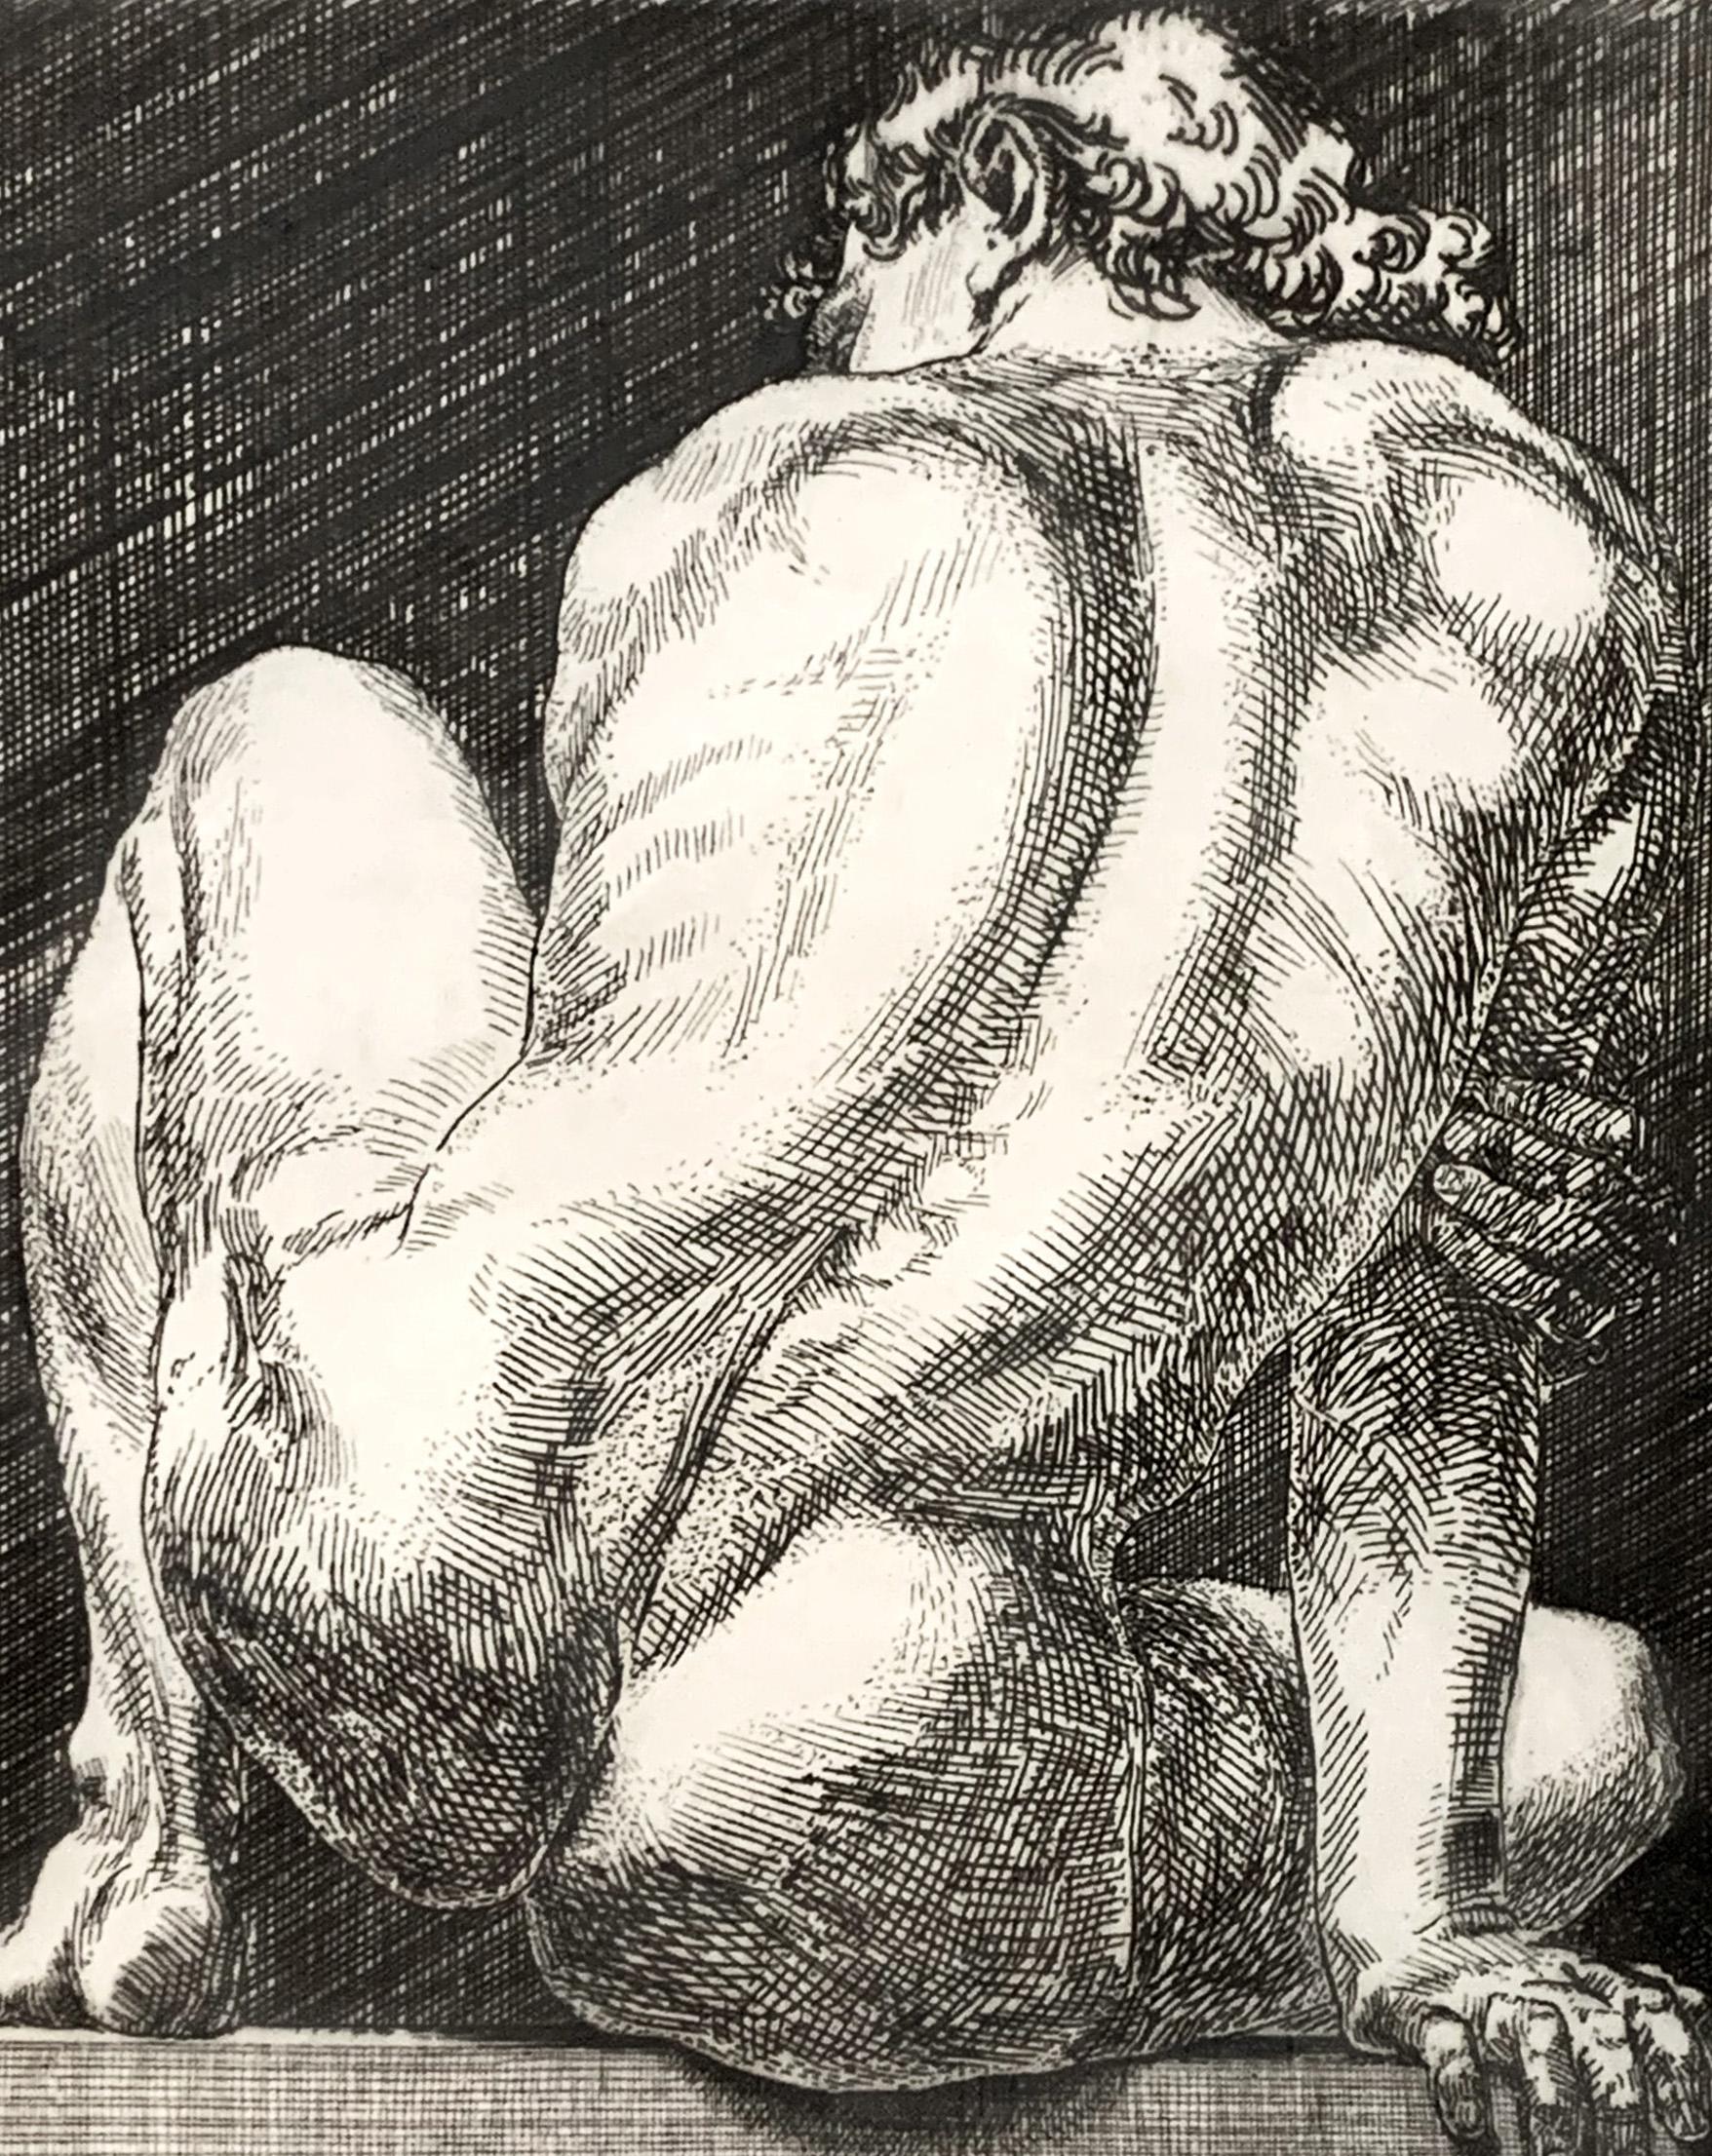 With a title that alludes to the great Ignudi in Michelangelo's Sistine Chapel ceiling, and with a bold clarity of detail that brings Albrecht Dürer's greatest etchings to mind, this 1984-vintage print depicts a muscular male nude in a seated